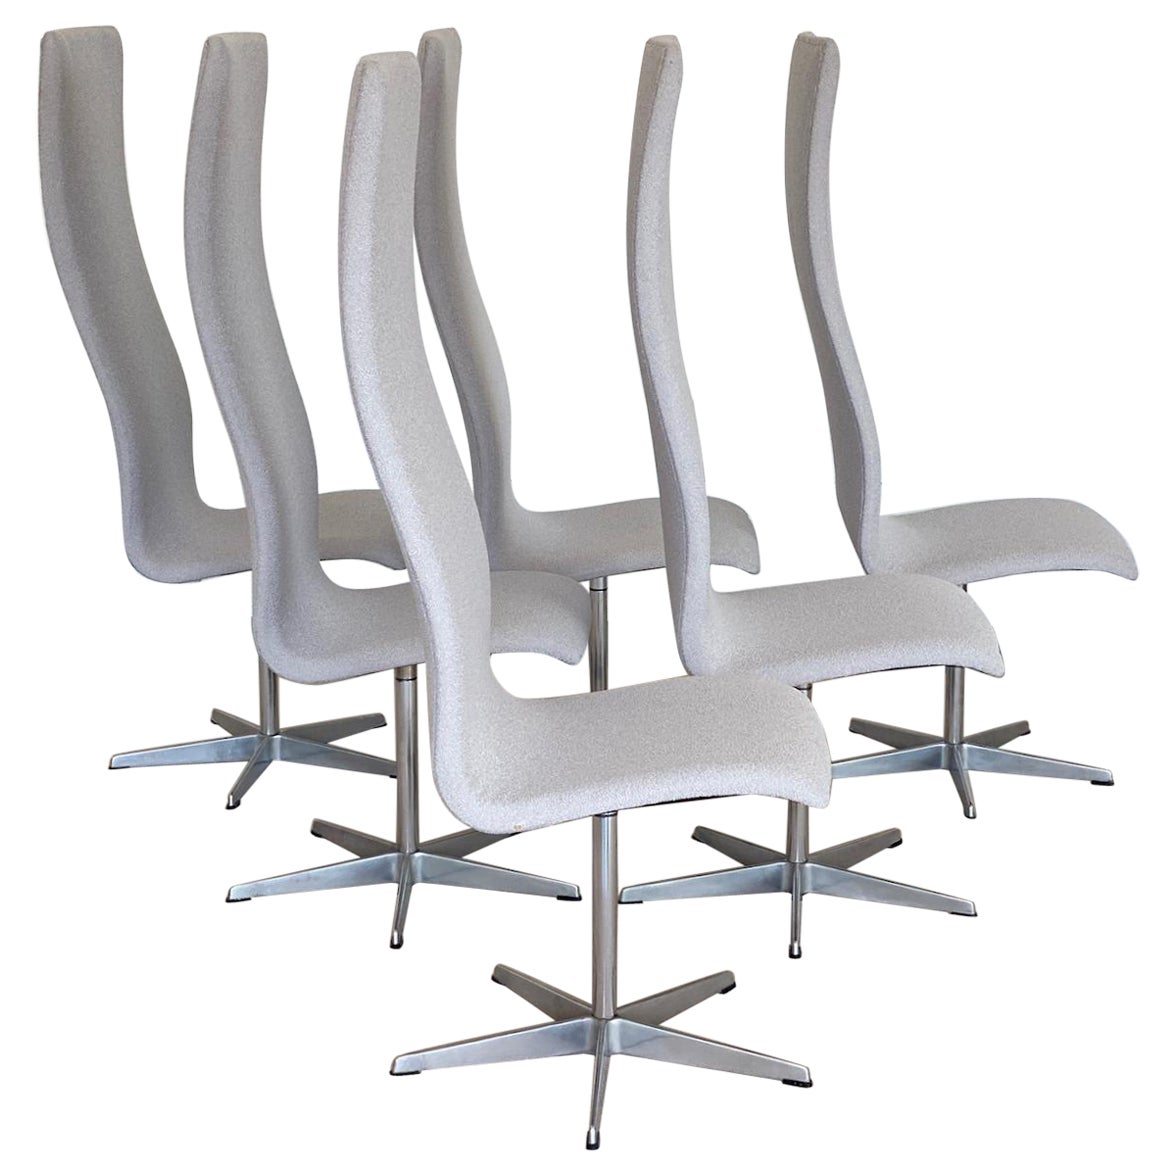 Set of 6 Oxford chairs by Arne Jacobson for Fritz Hansen - Denmark 1960s For Sale